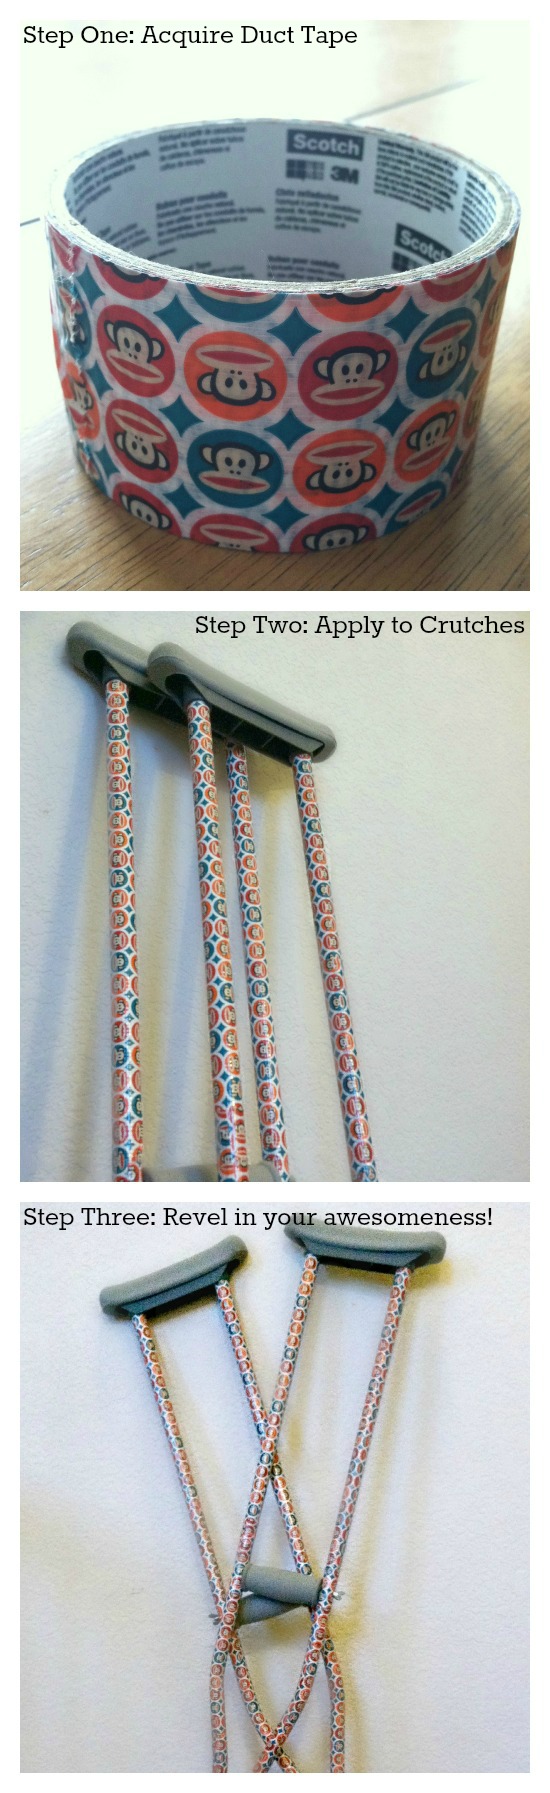 duct-tape-crutches